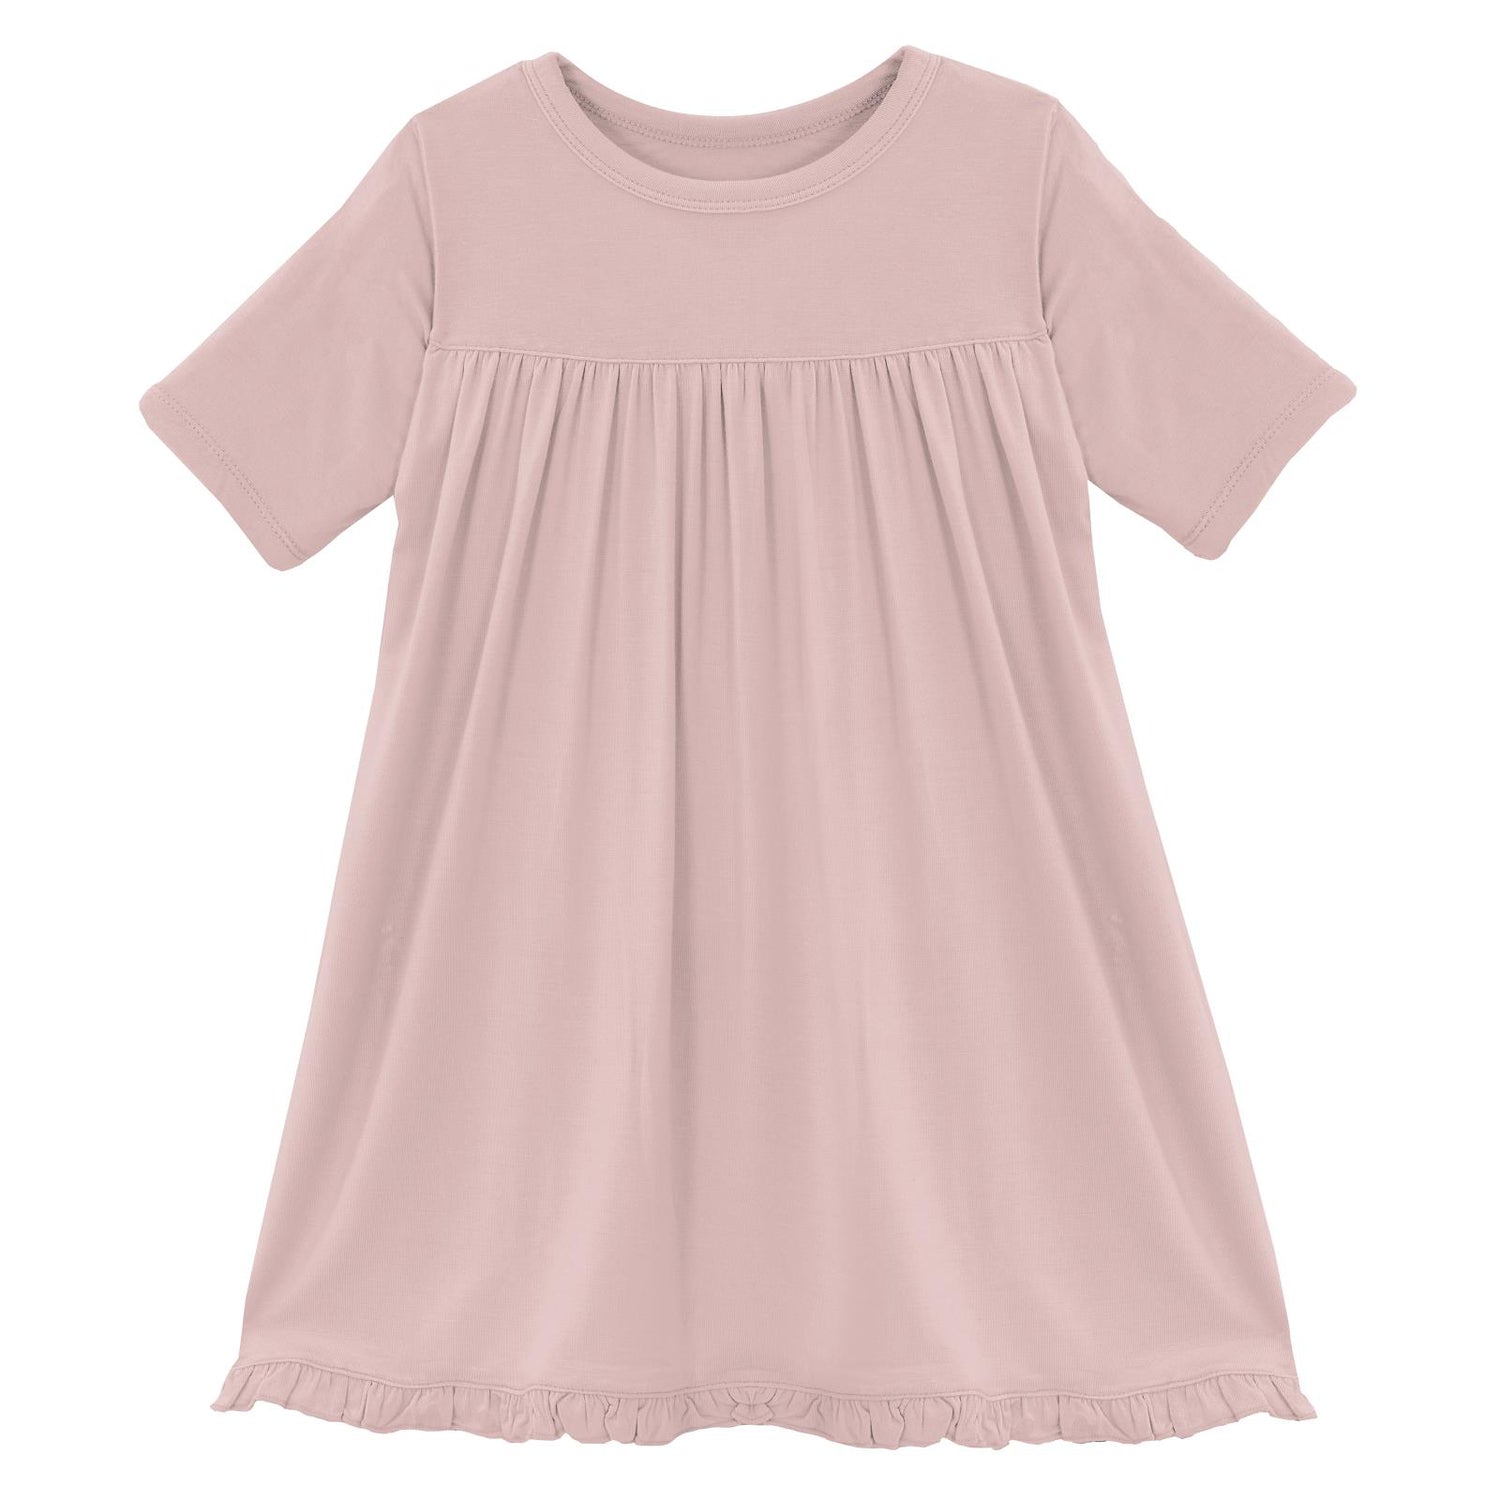 Classic Short Sleeve Swing Dress in Baby Rose